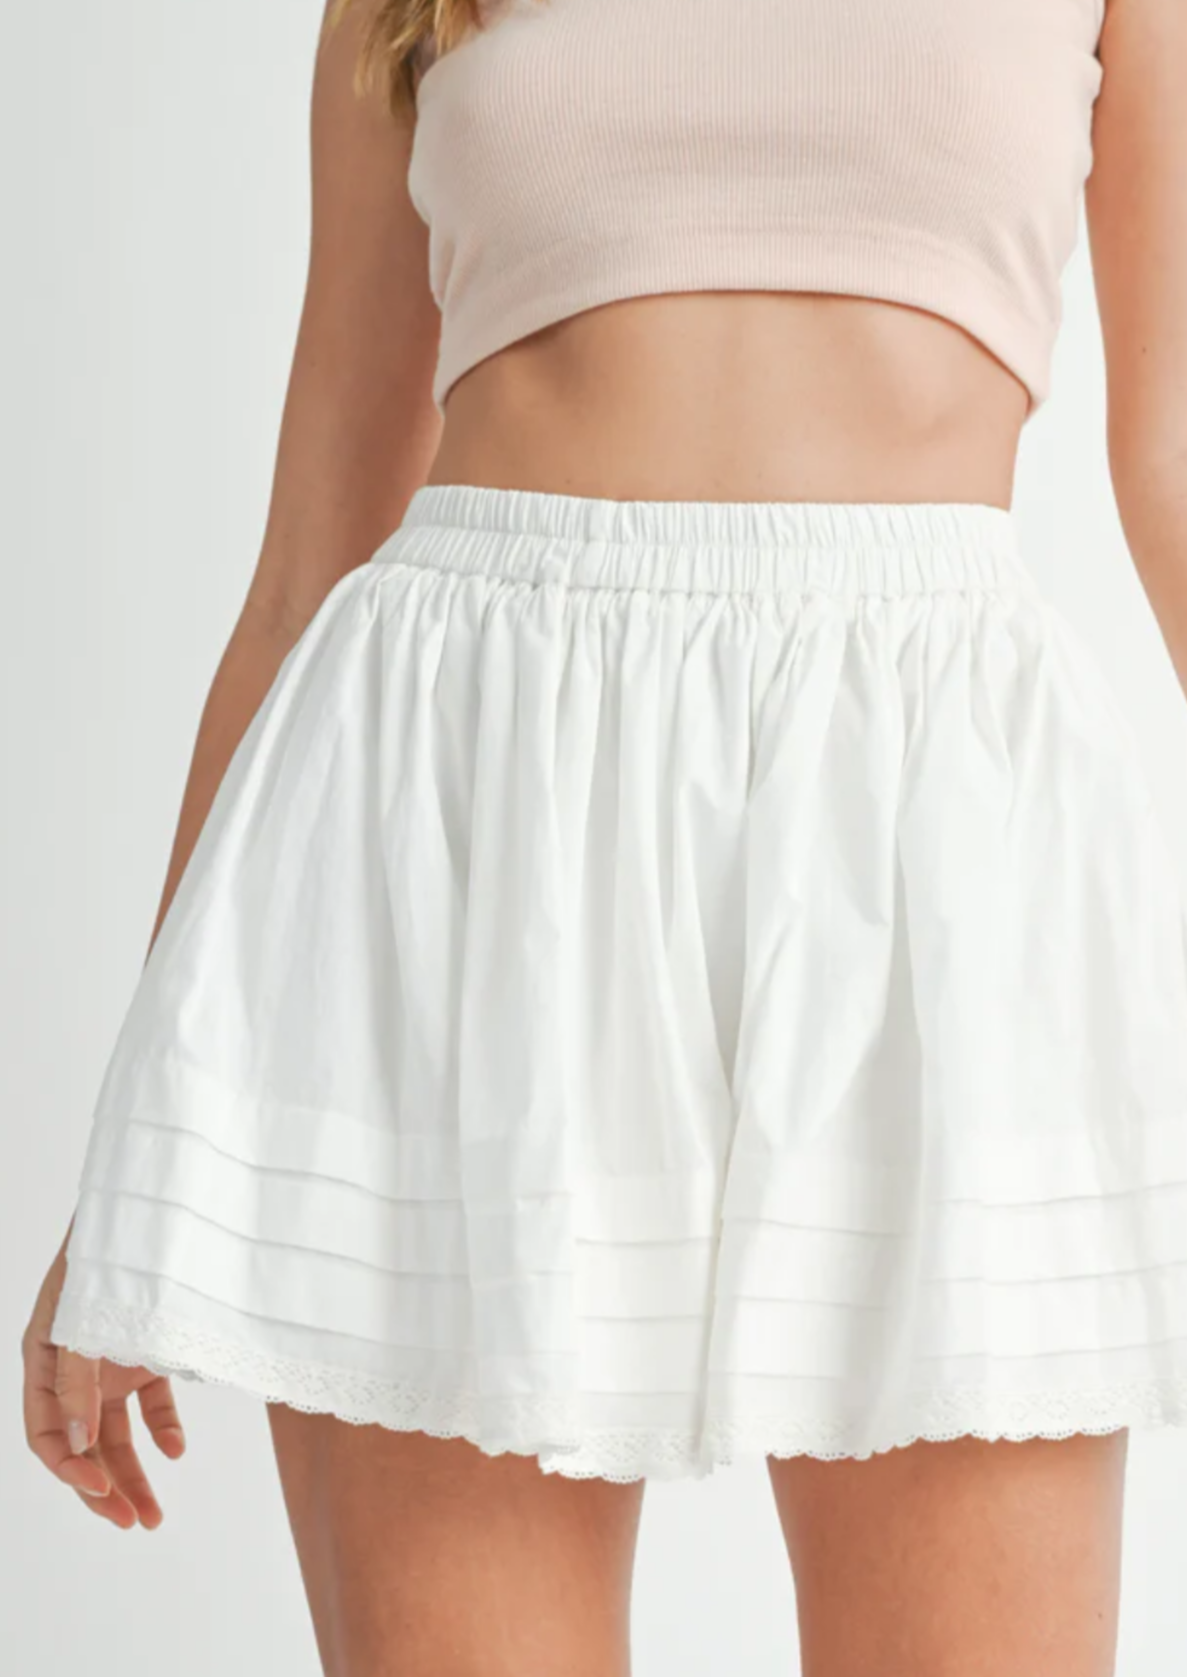 Pintucked and Lace Trim Mini Skirt